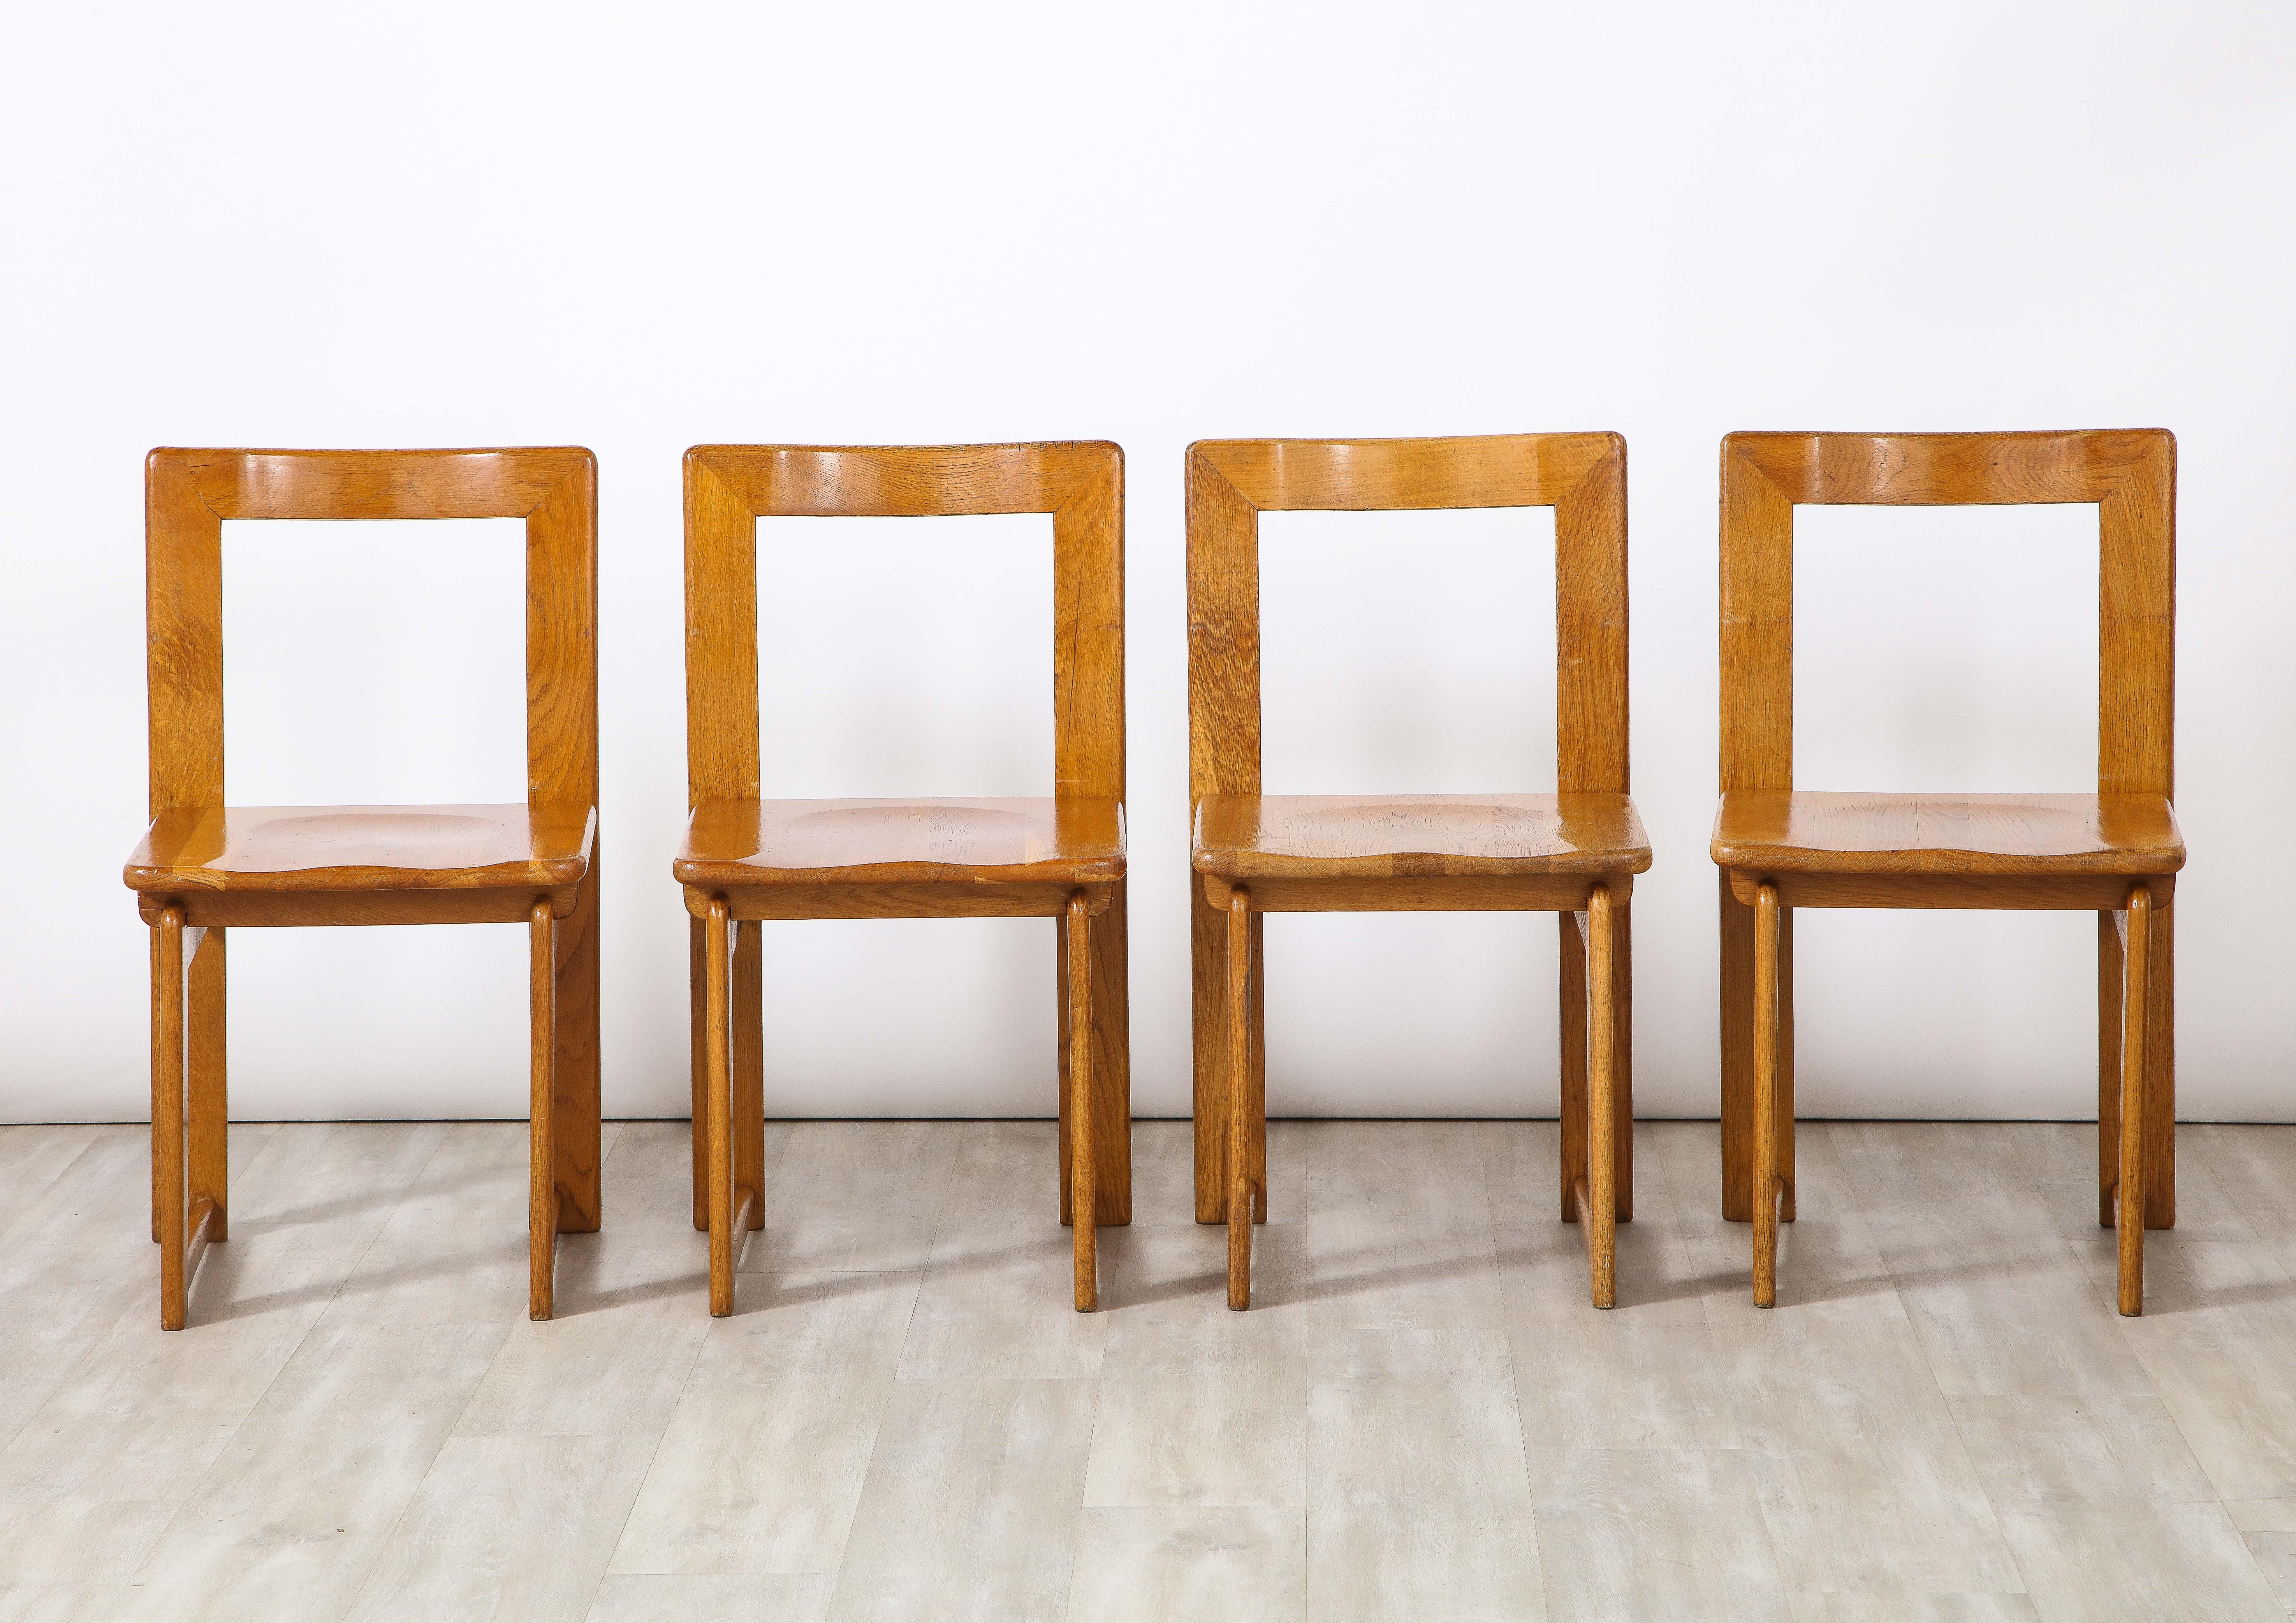 A charming set of four Italian oak rustic dining chairs with open backs, the top backrest is elegantly curved and highlights the indentation of the seat, resting on straight legs, with interlocking joints.  The oak is a wonderfully warm patina.